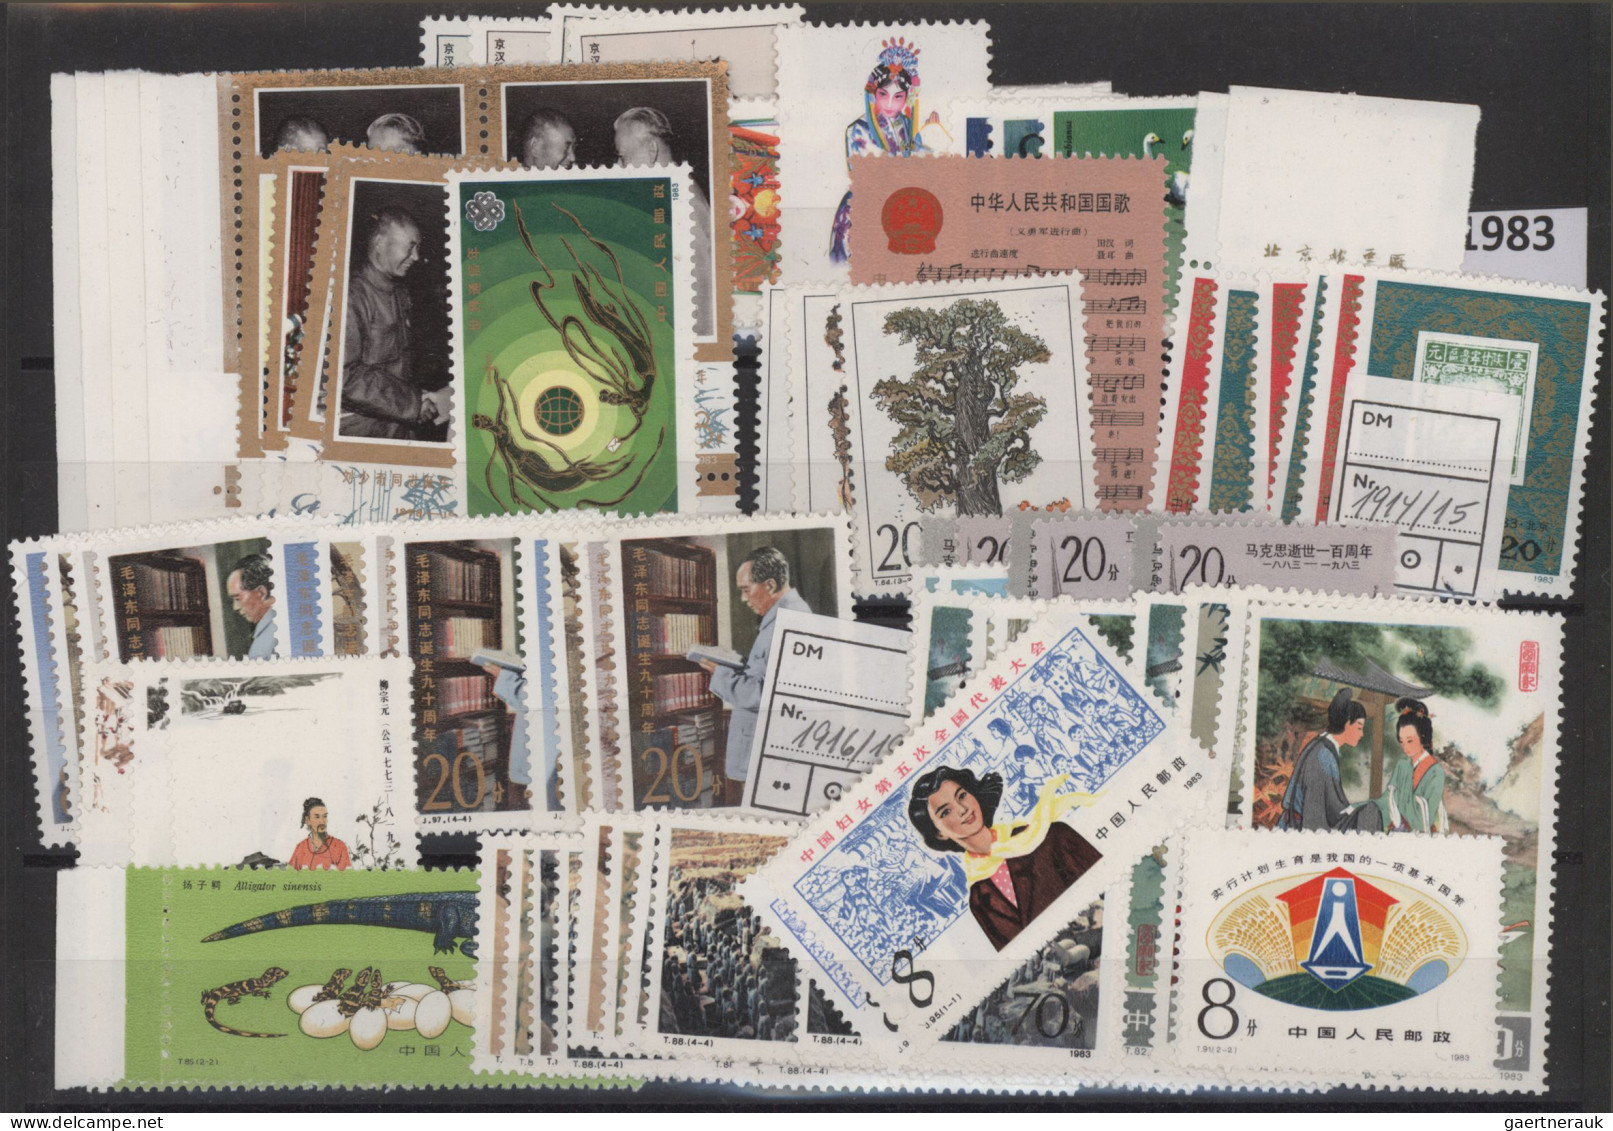 China (PRC): 1949/2020 (approx.), large collection of stamps, presentation packs